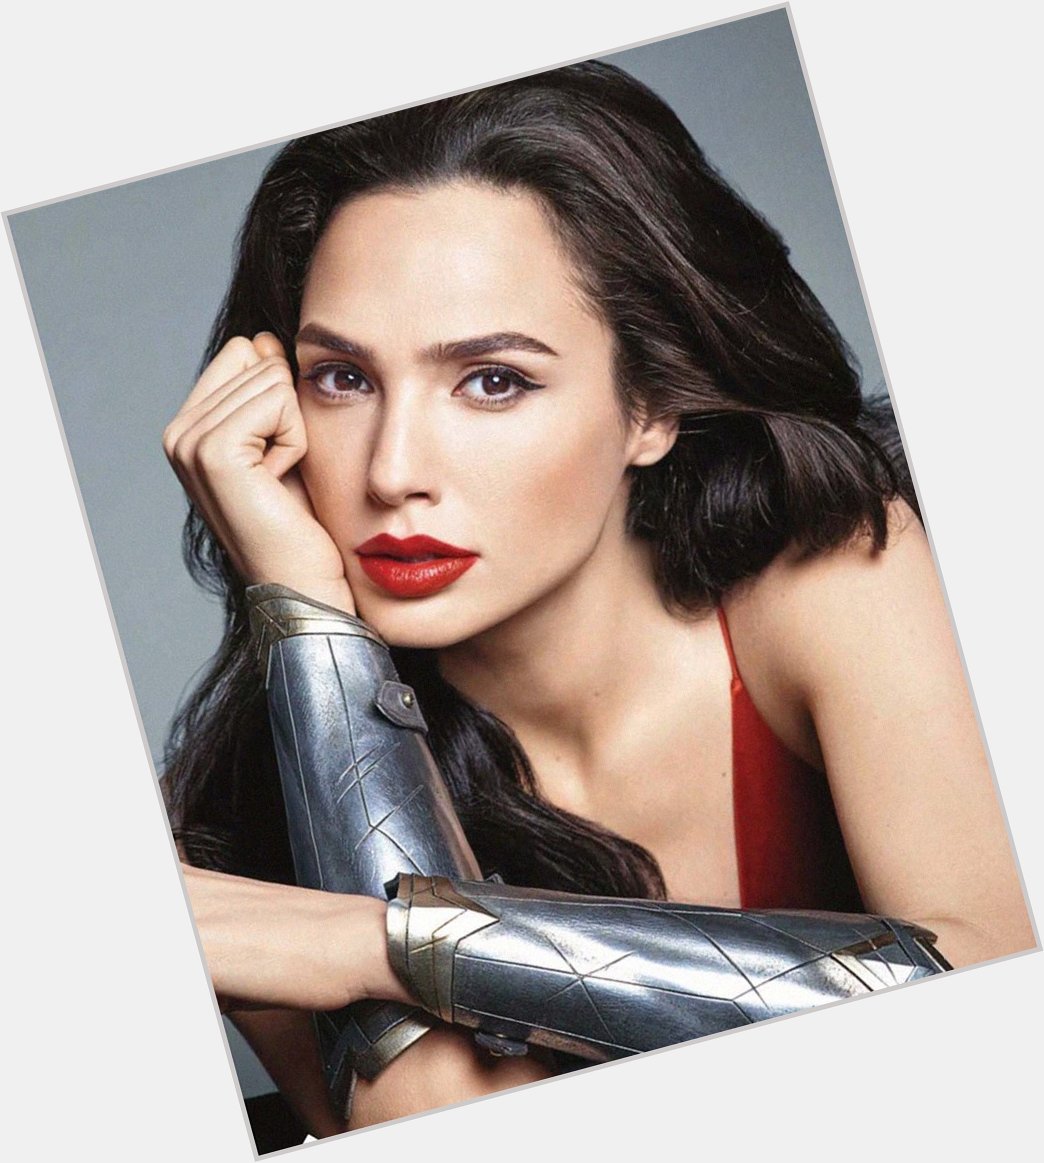 Happy birthday Gal Gadot!!
A true inspiration to so many girls and women all around the world! 